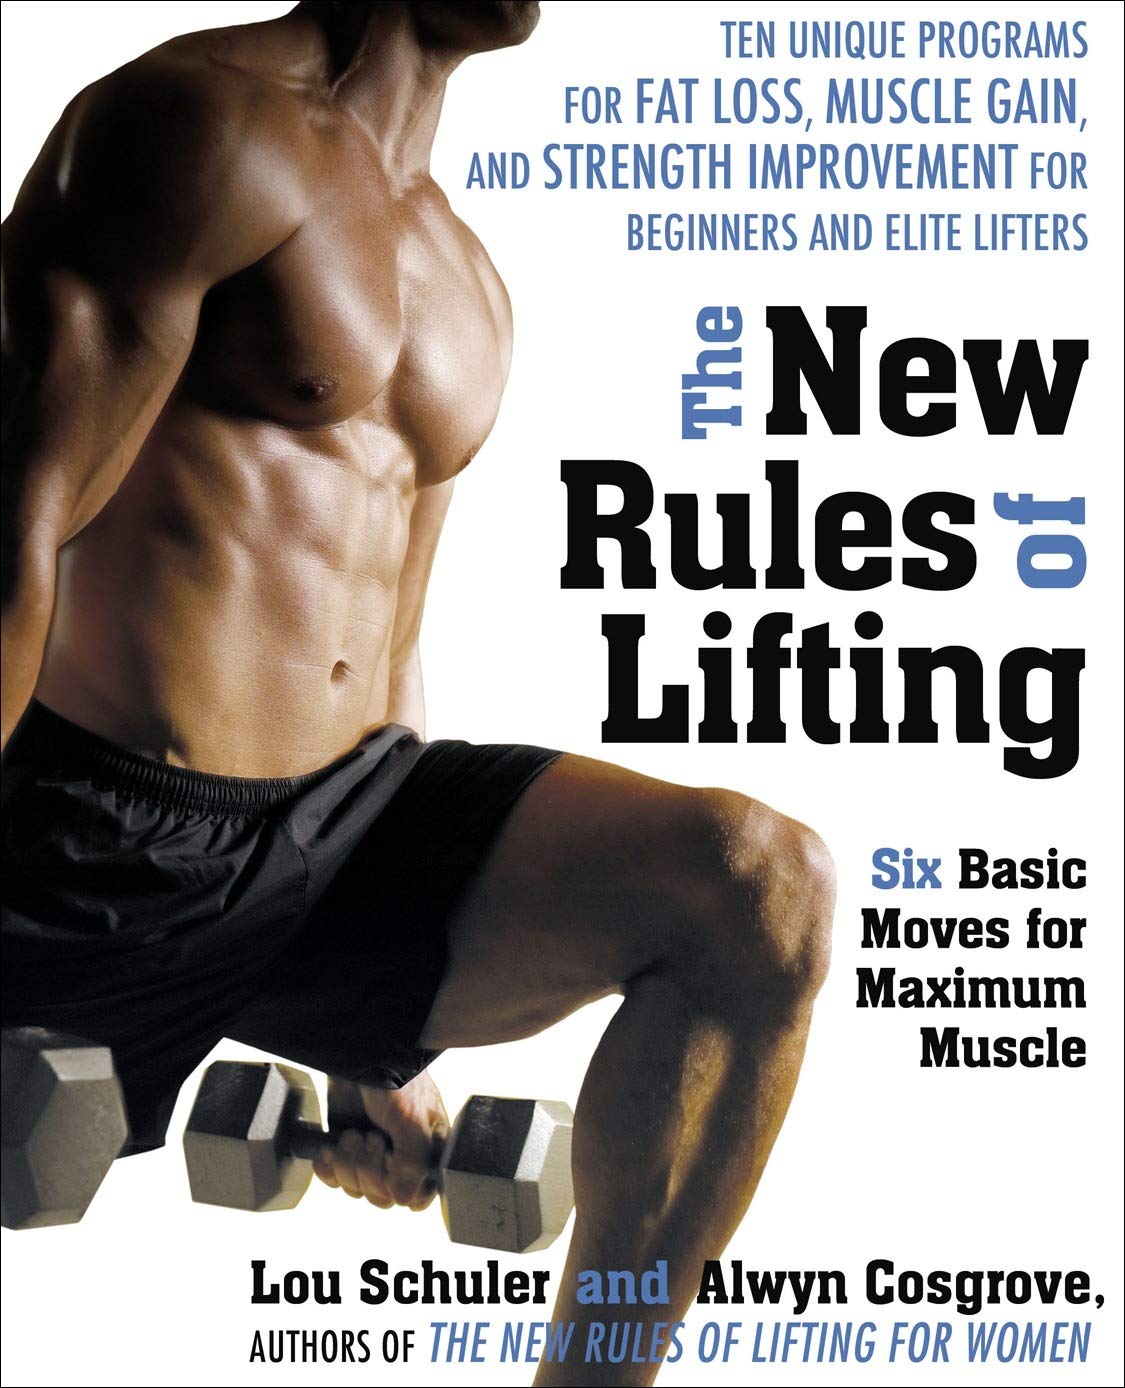 The New Rules of Lifting | Lou Schuler, Alwyn Cosgrove